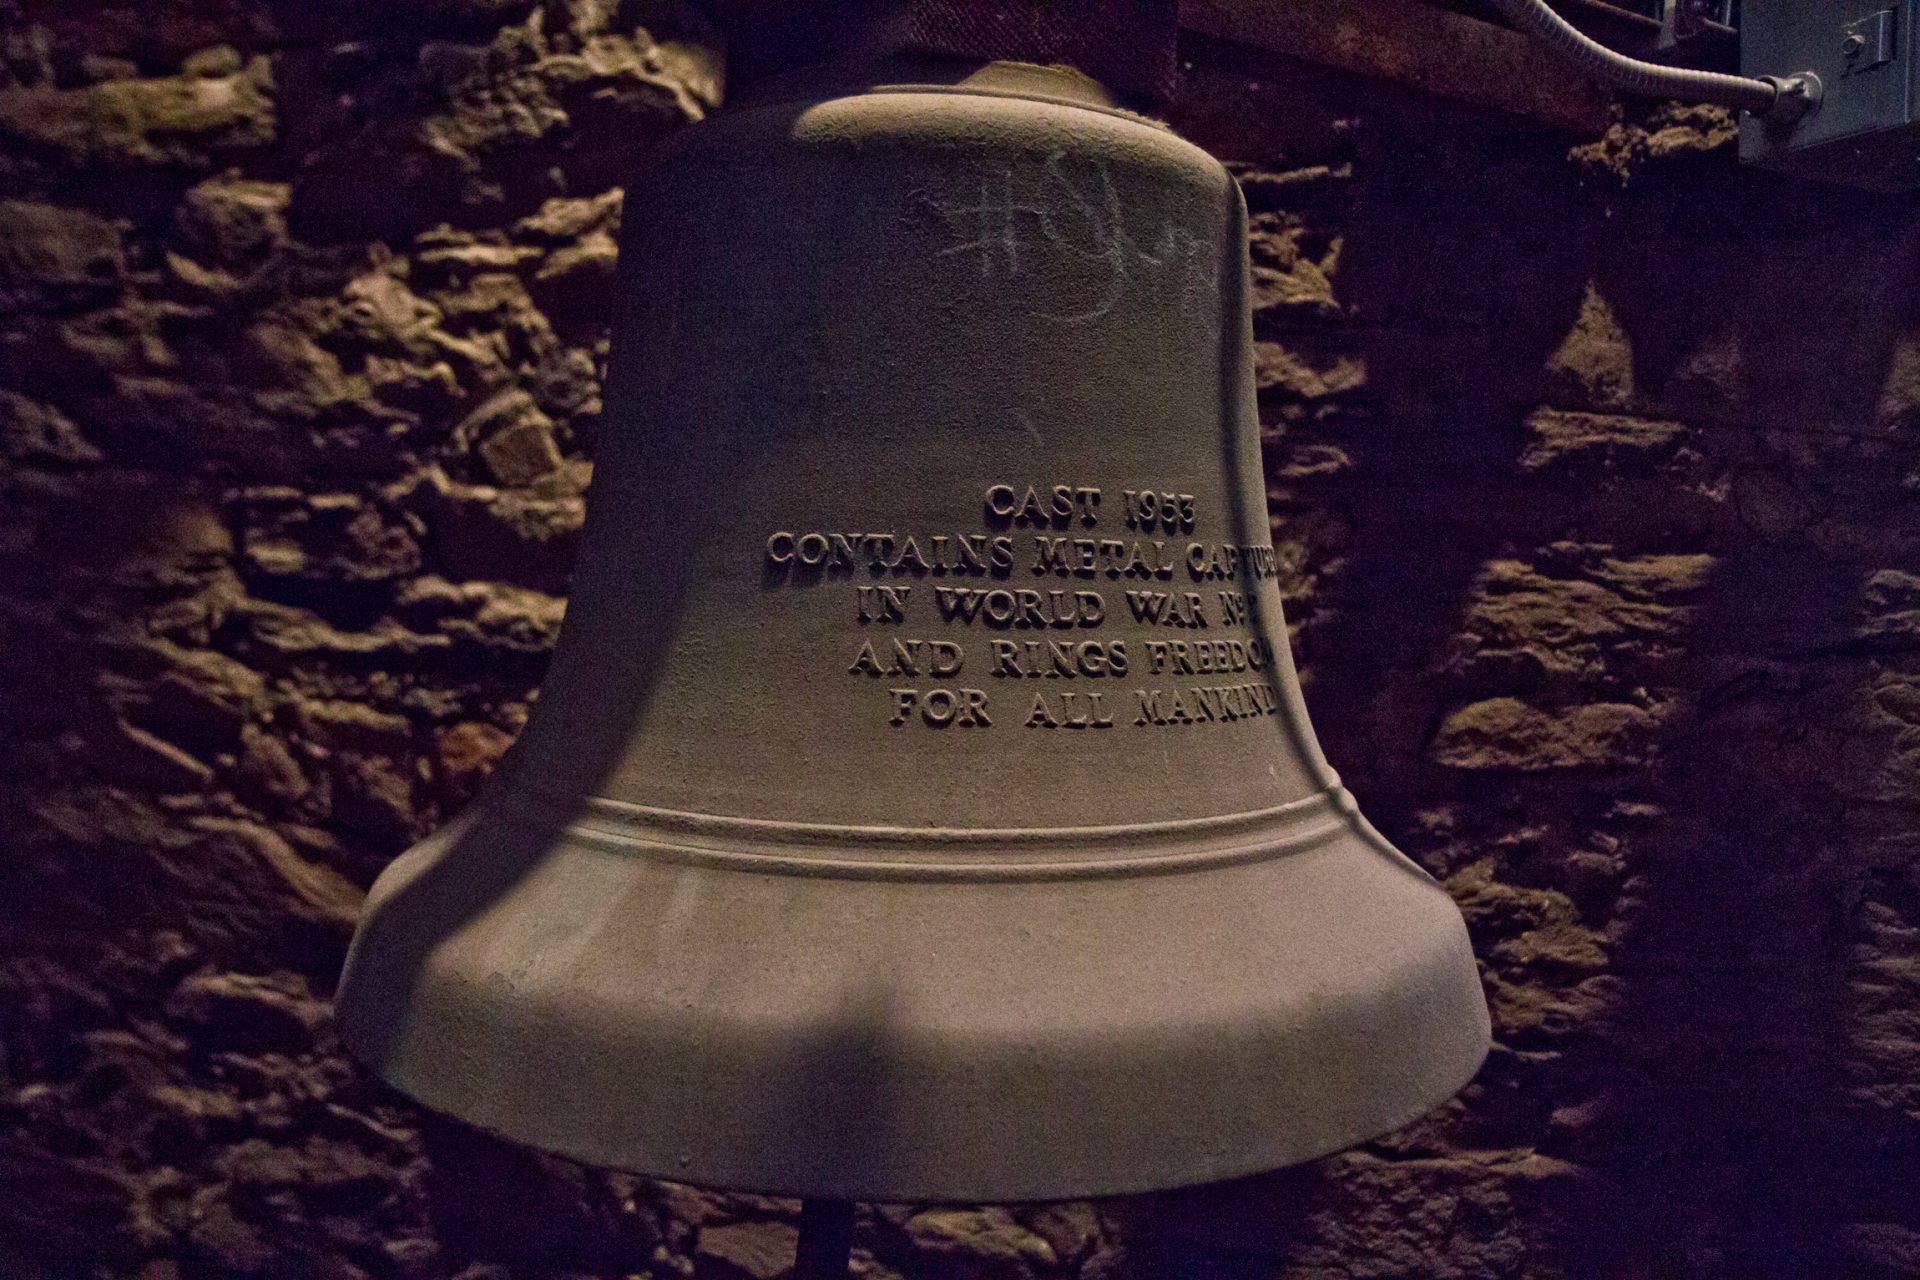 A bell made of captured steel from WWII at the Christ Church steeple in Philadelphia.